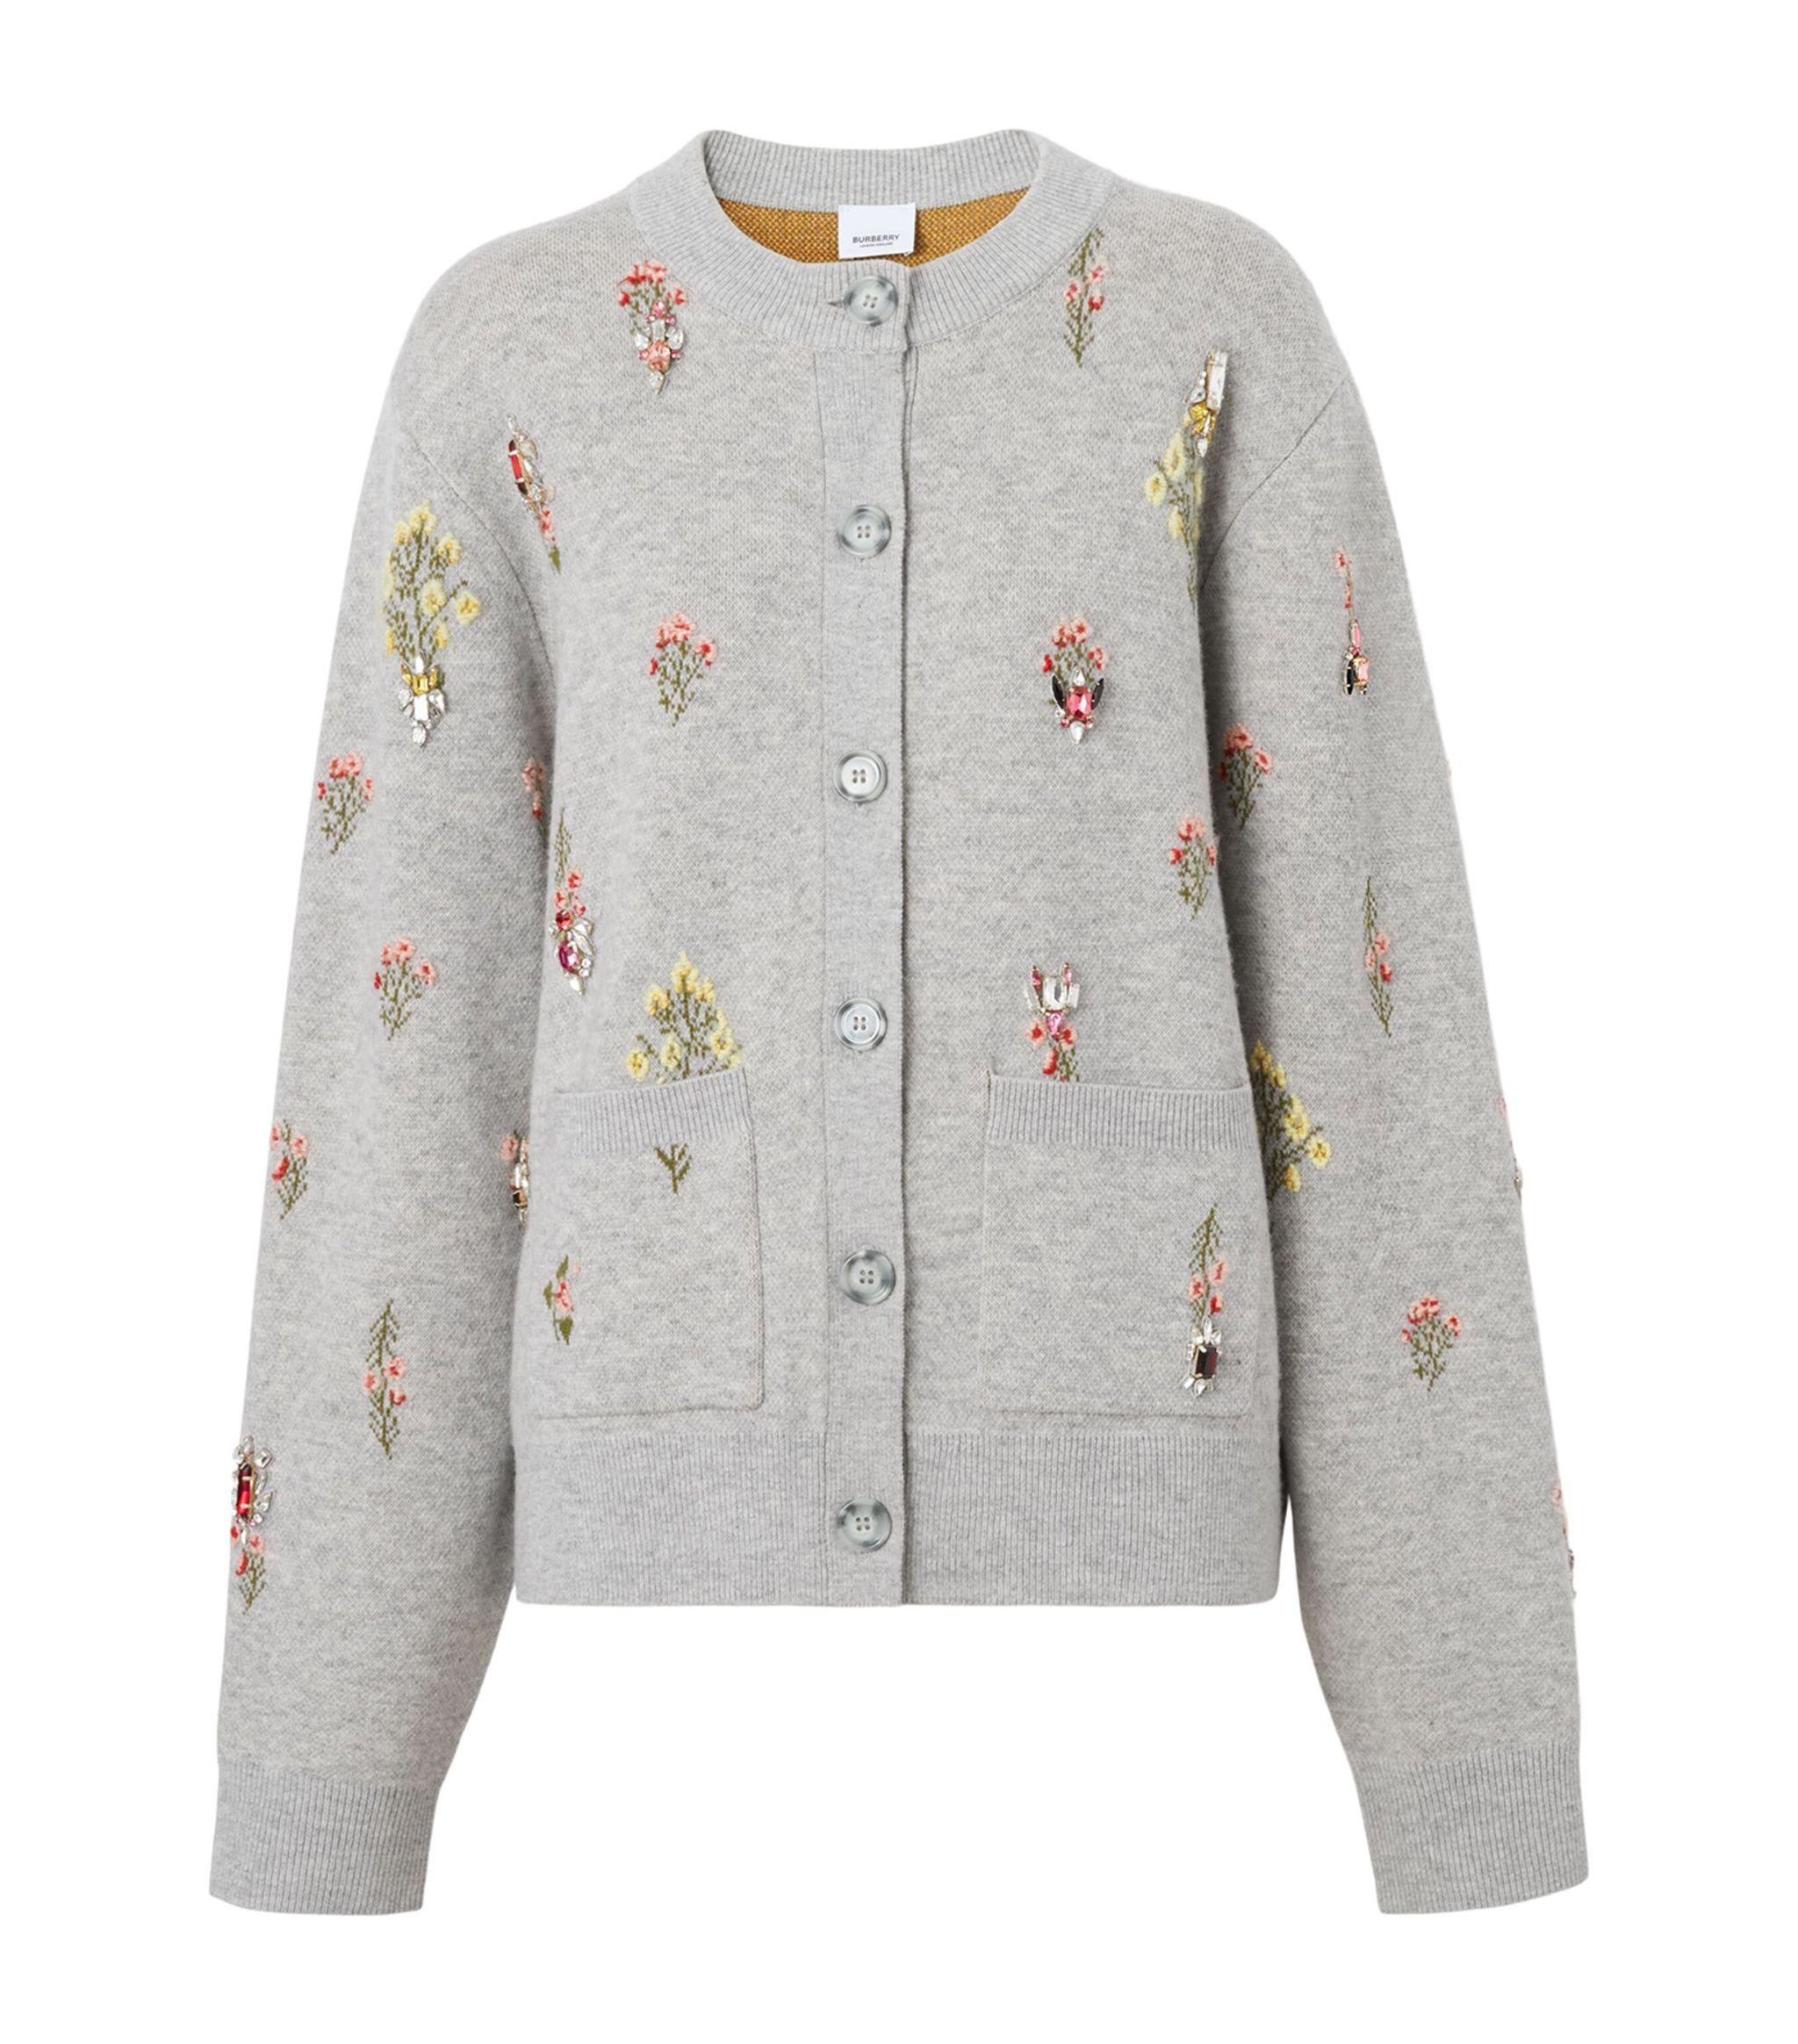 Burberry Crystal-embellished Floral Cardigan in Gray | Lyst